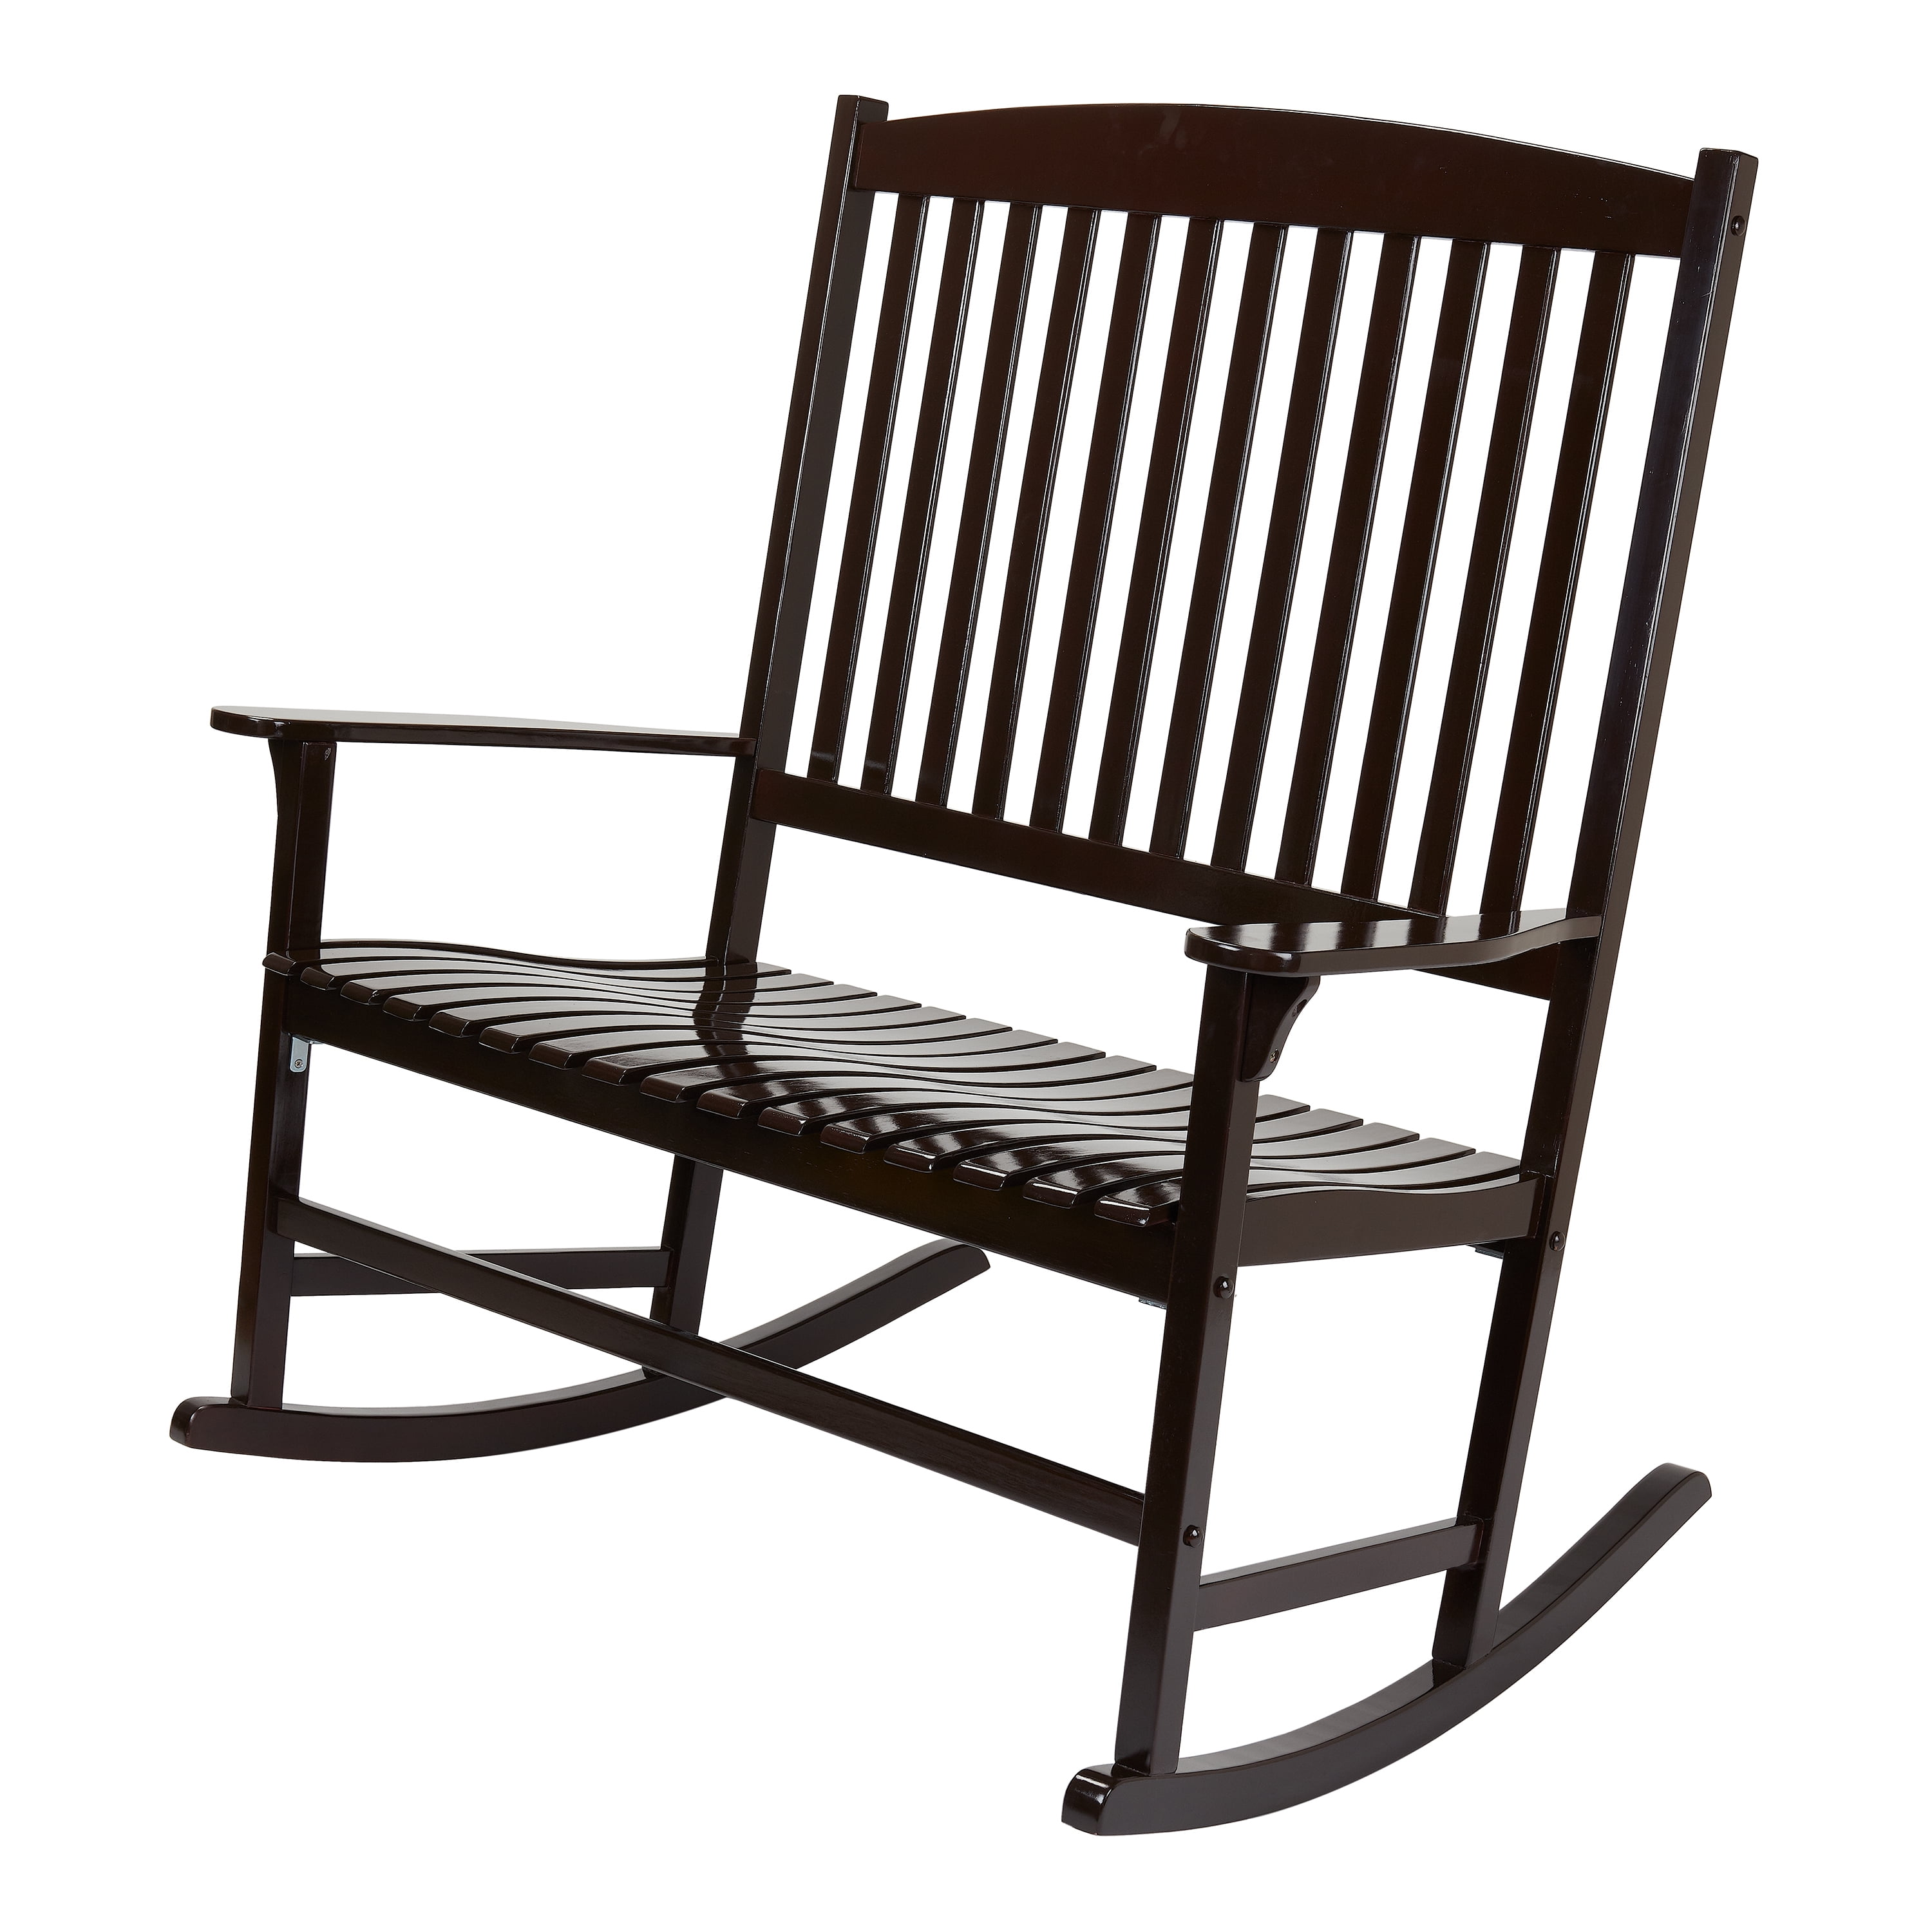 Mainstays Double Wood Outdoor Rocker, Mainstays Outdoor Wood Porch Rocking Chair Black